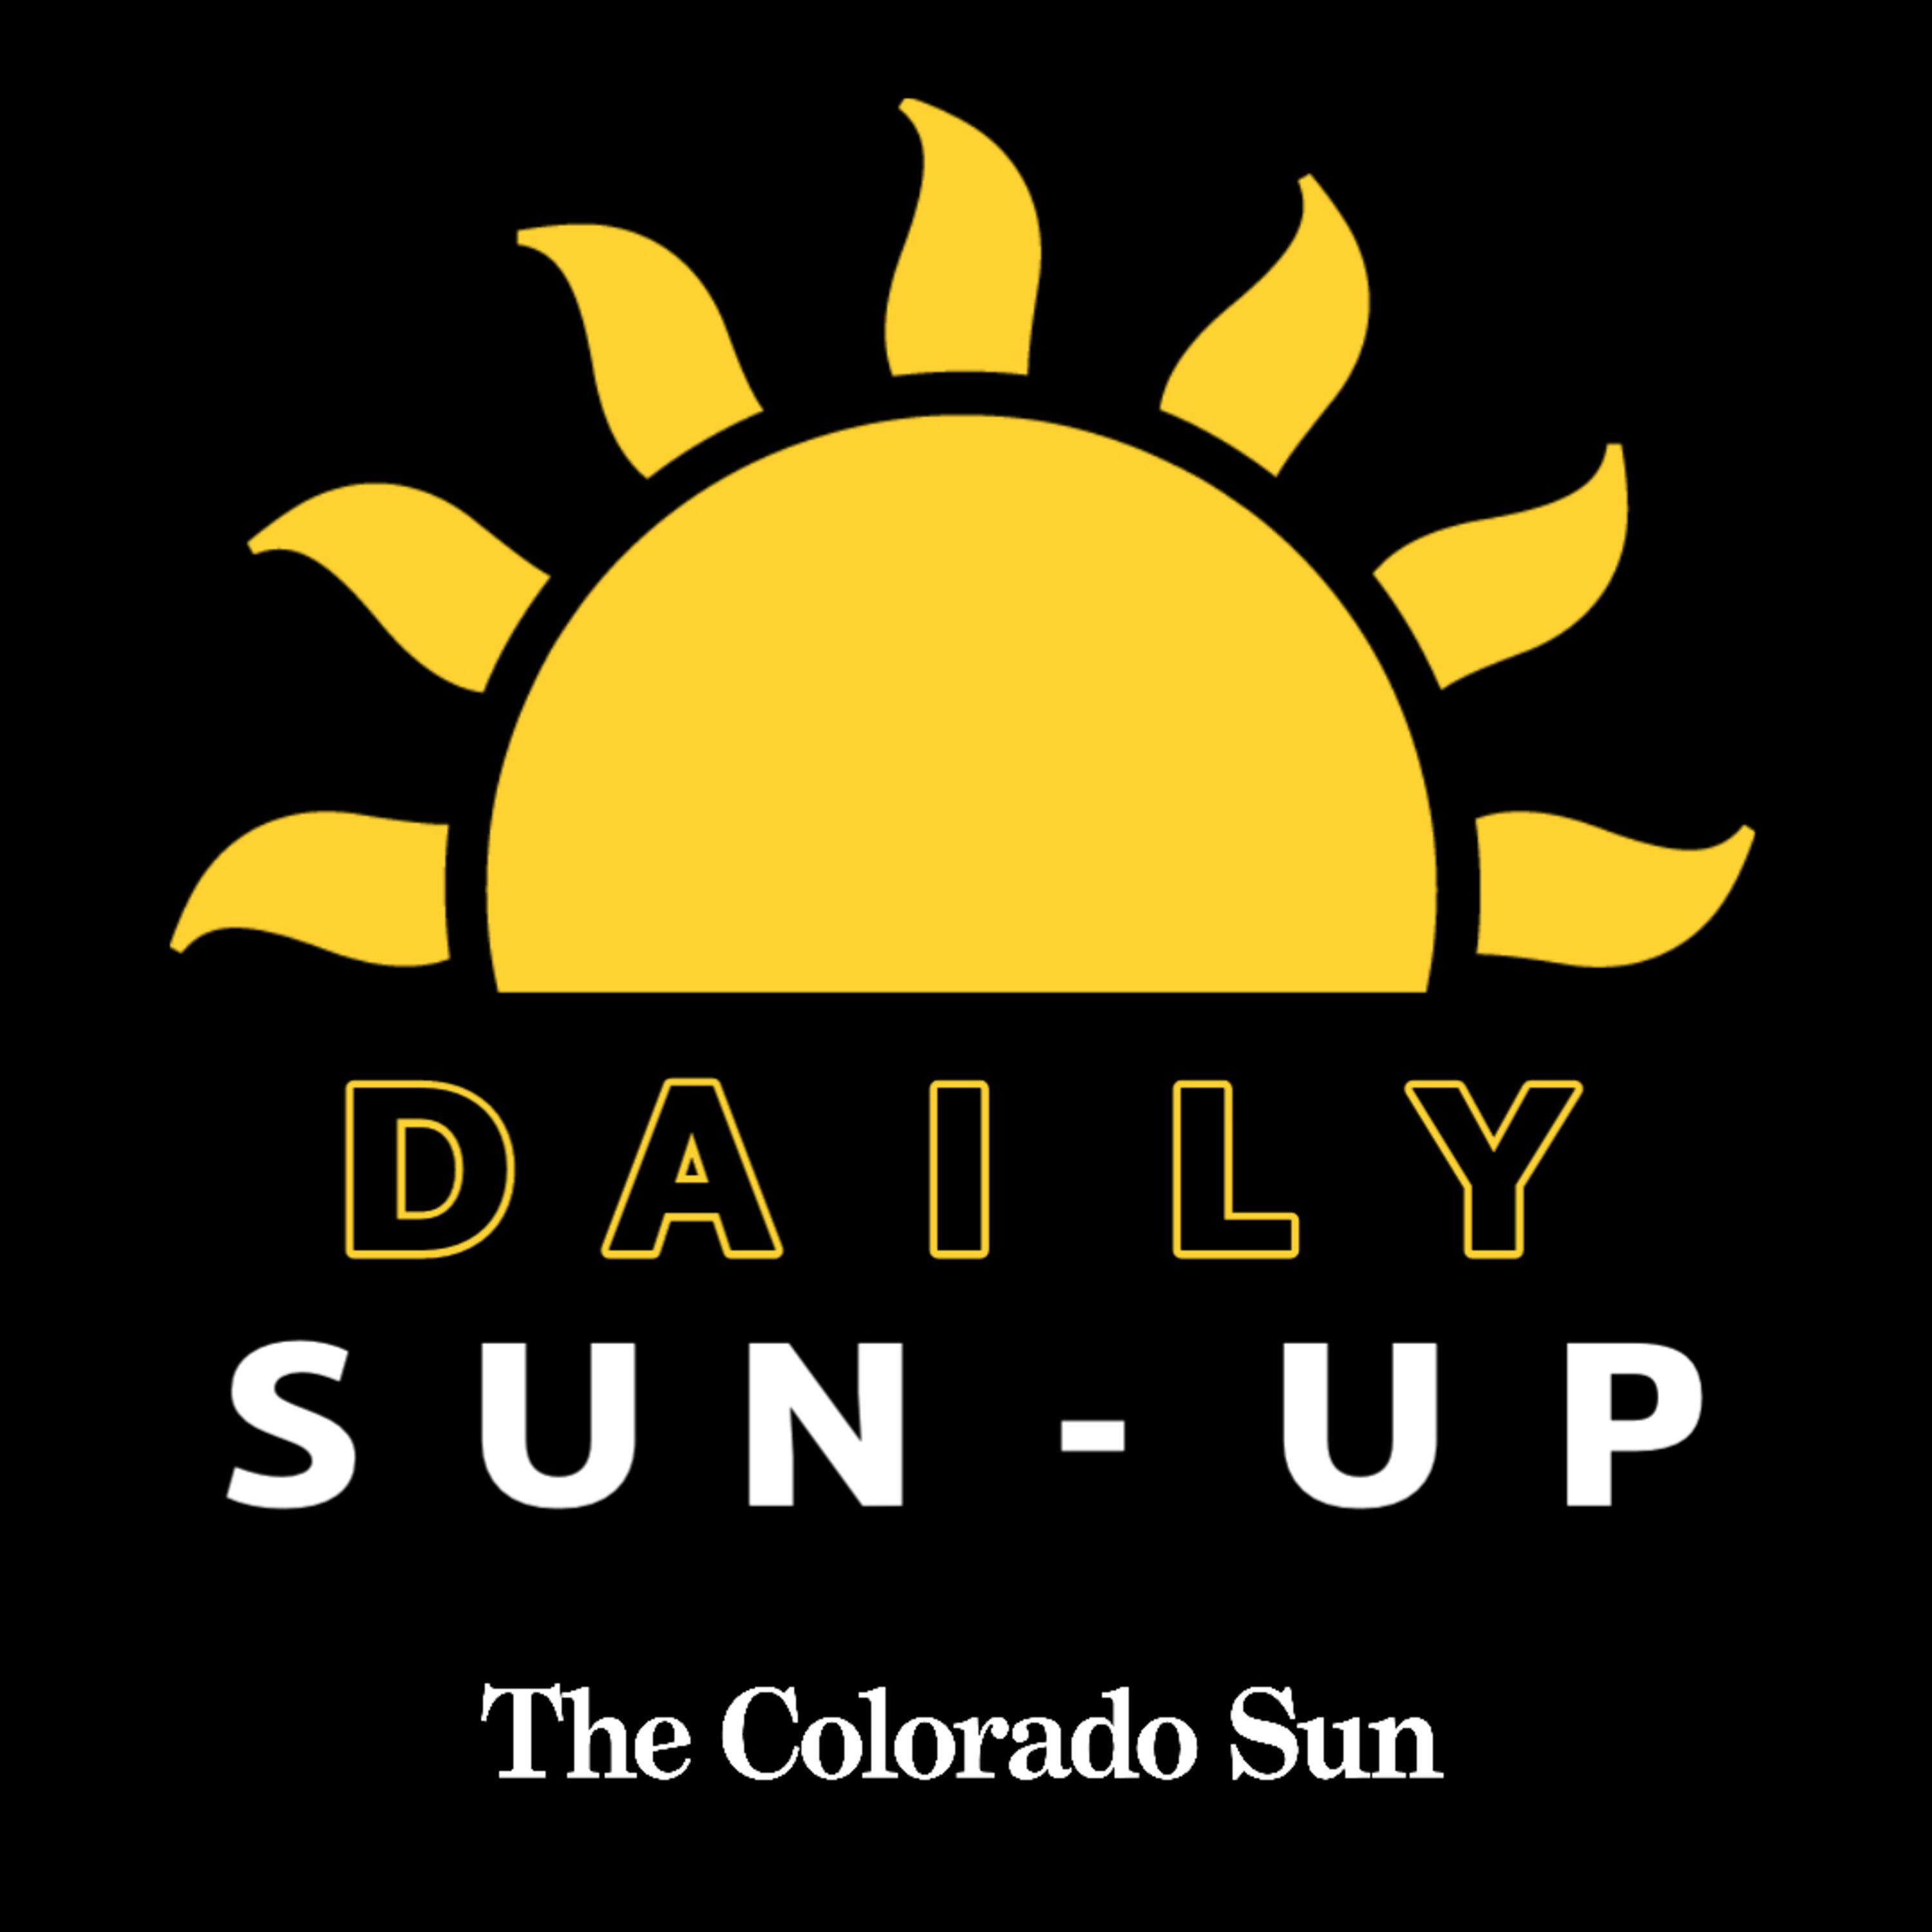 Colorado Sun Daily Sun-Up: Lawsuit claims state hasn't done enough for kids struggling with mental health; Franklin Rhoda explores San Juan Mountains